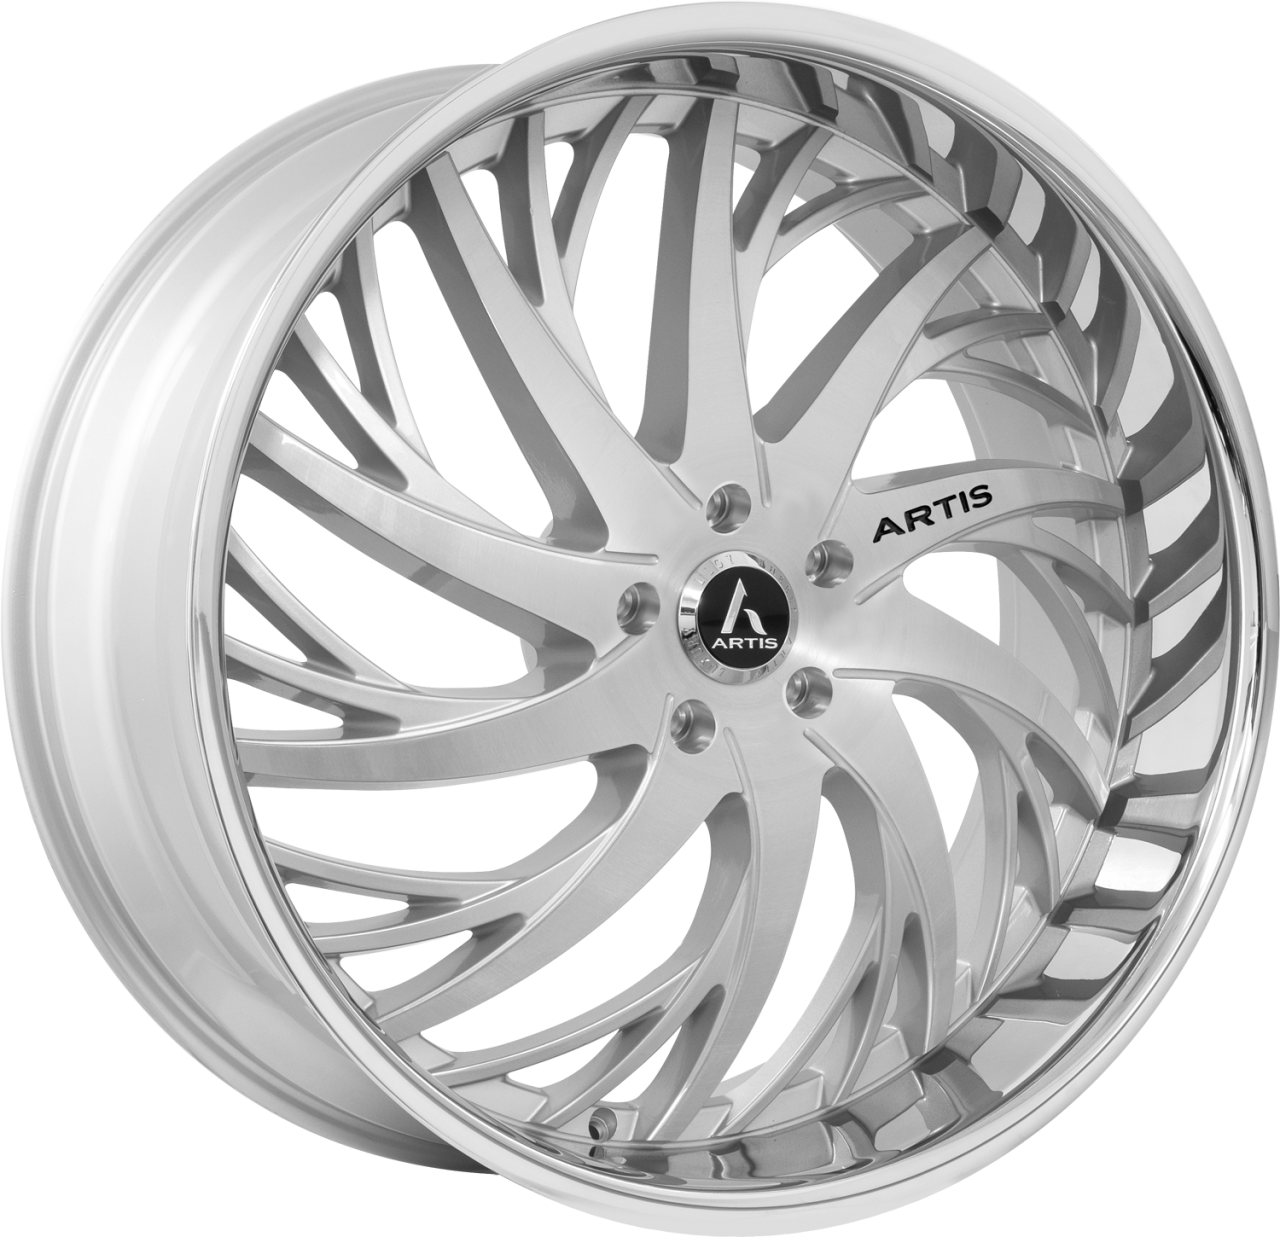 Artis Forged Decatur wheel with Silver Polished Lip finish